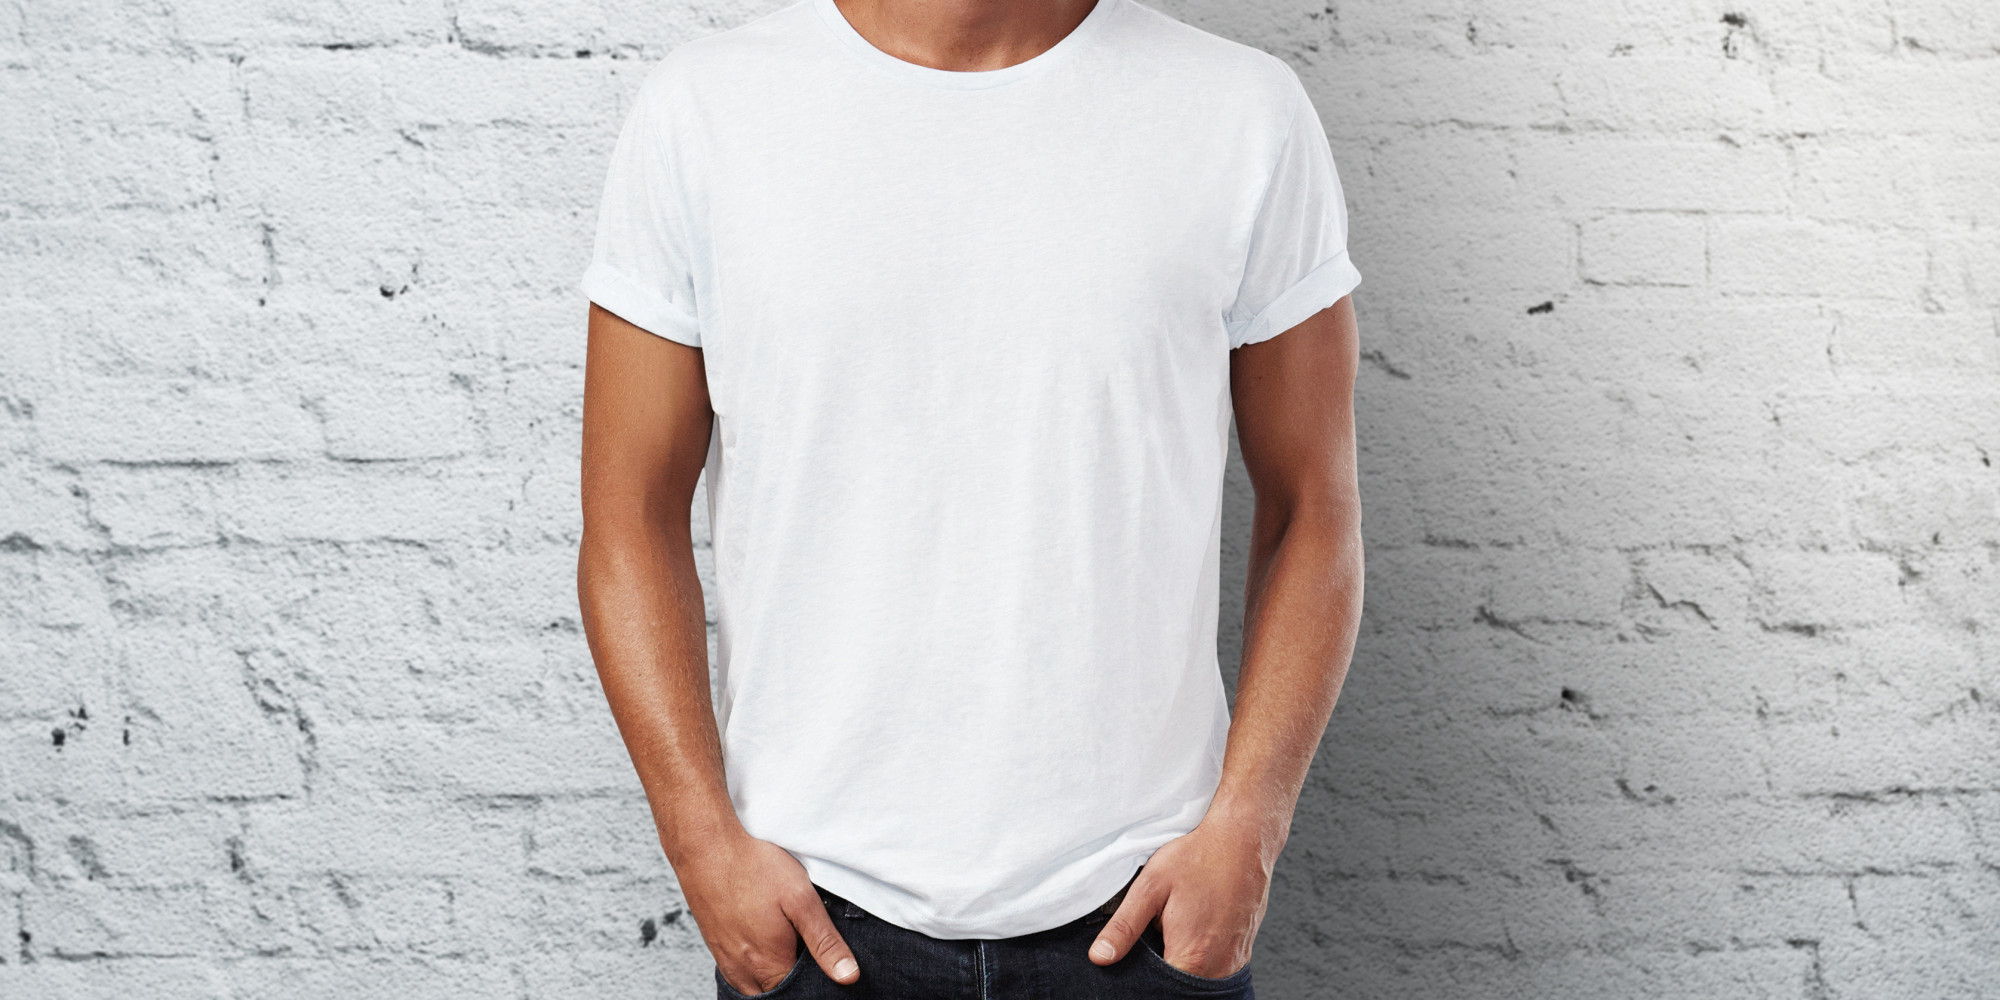 good quality white t shirts Shop Clothing & Shoes Online